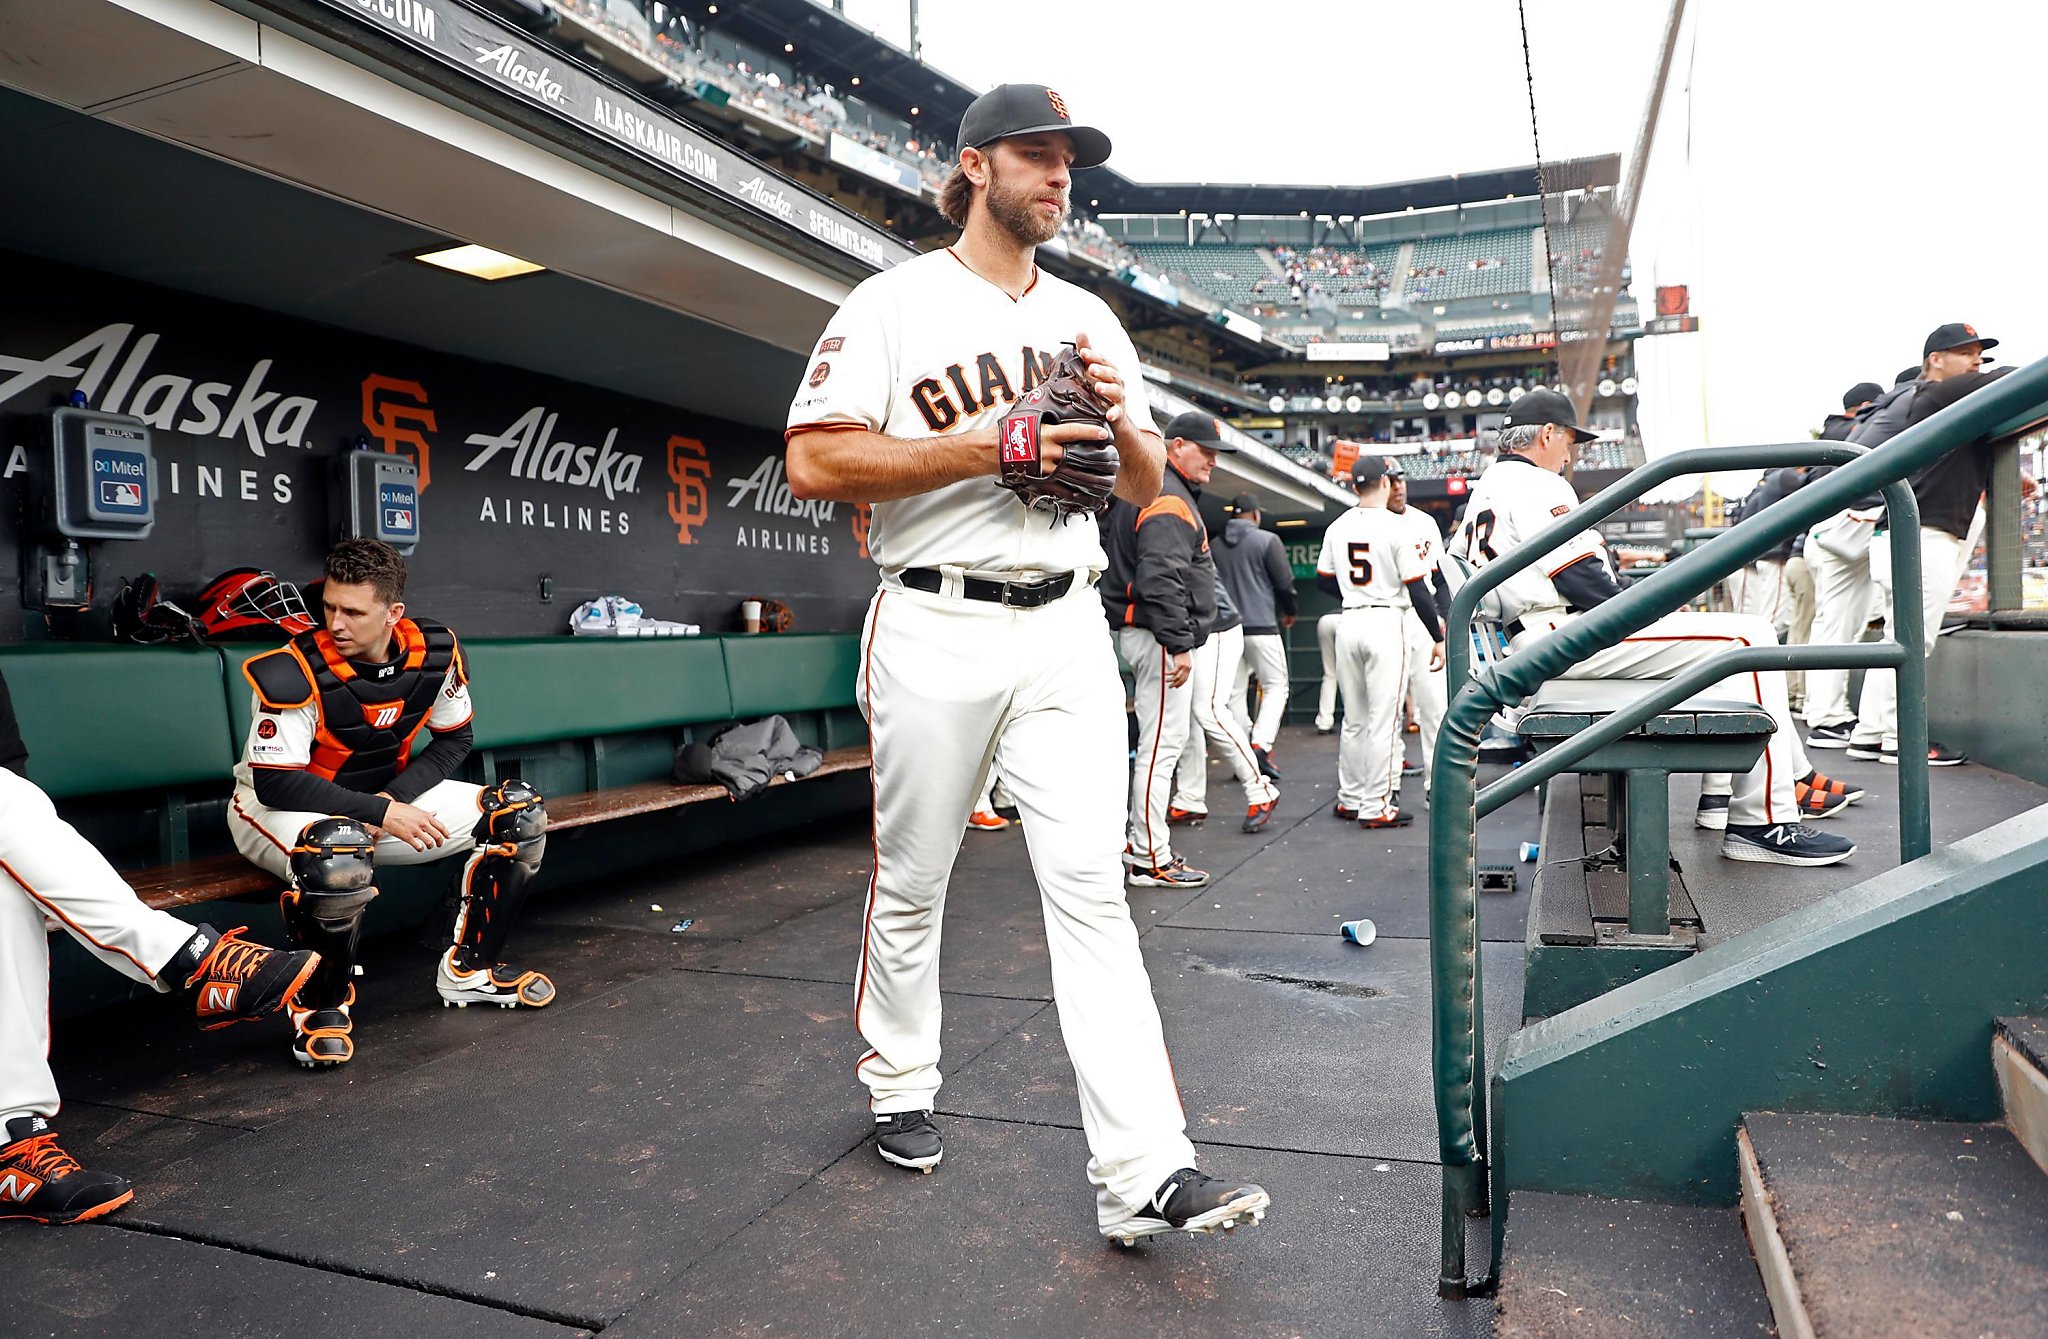 Giants' Madison Bumgarner trade decision: The makings of a historic choice